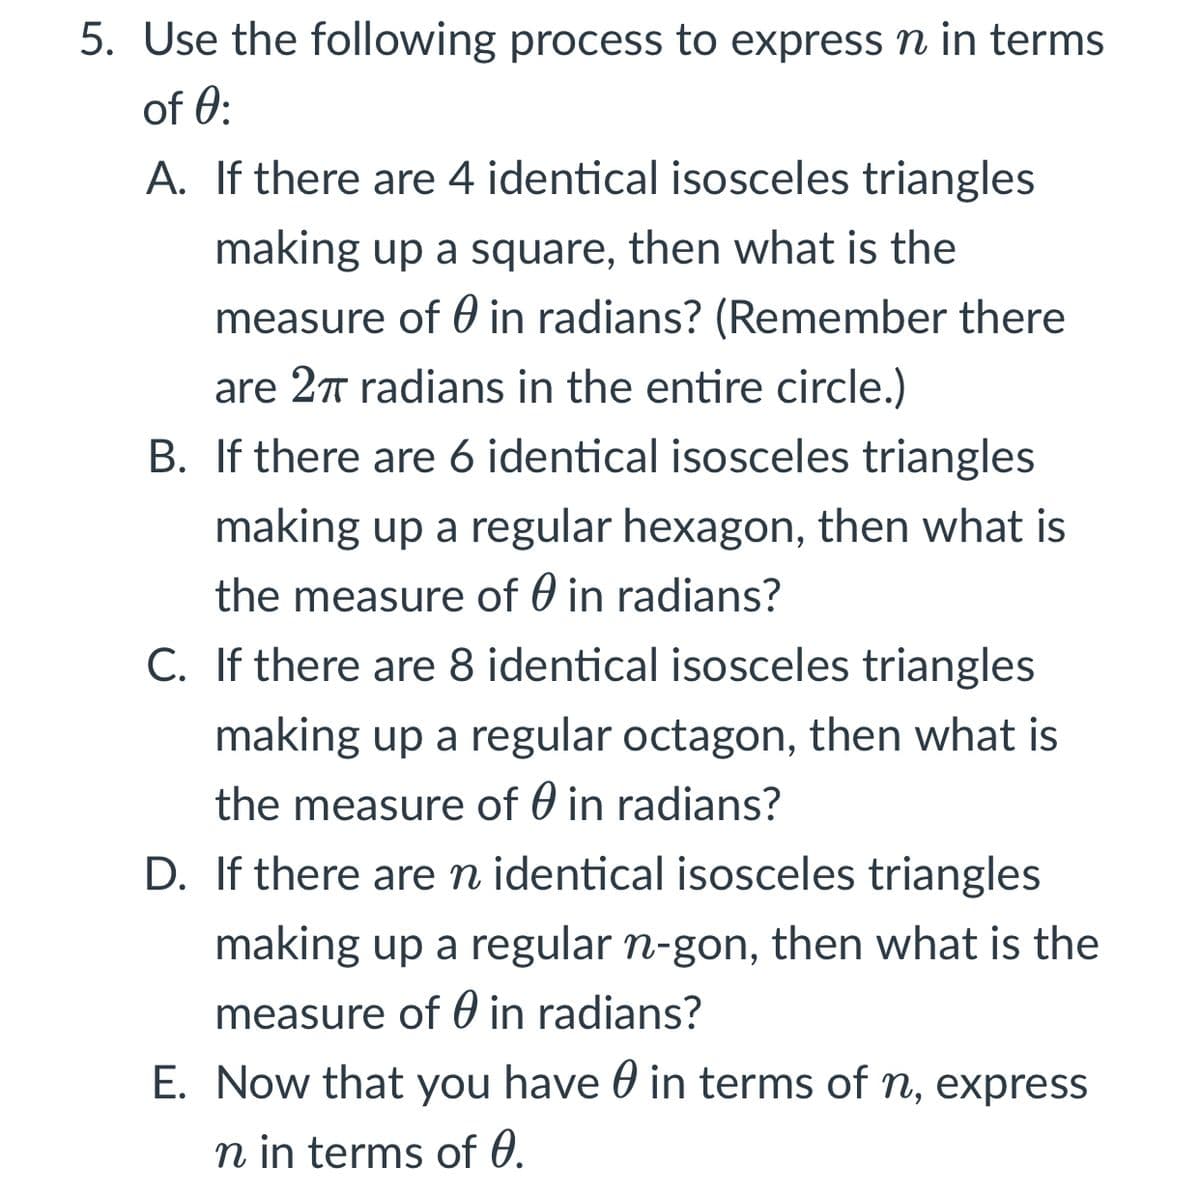 5. Use the following process to express n in terms
of 0:
A. If there are 4 identical isosceles triangles
making up a square, then what is the
measure of 0 in radians? (Remember there
are 27 radians in the entire circle.)
B. If there are 6 identical isosceles triangles
making up a regular hexagon, then what is
the measure of 0 in radians?
C. If there are 8 identical isosceles triangles
making up a regular octagon, then what is
the measure of 0 in radians?
D. If there aren identical isosceles triangles
making up a regular n-gon, then what is the
measure of 0 in radians?
E. Now that you have 0 in terms of n, express
n in terms of 0.
